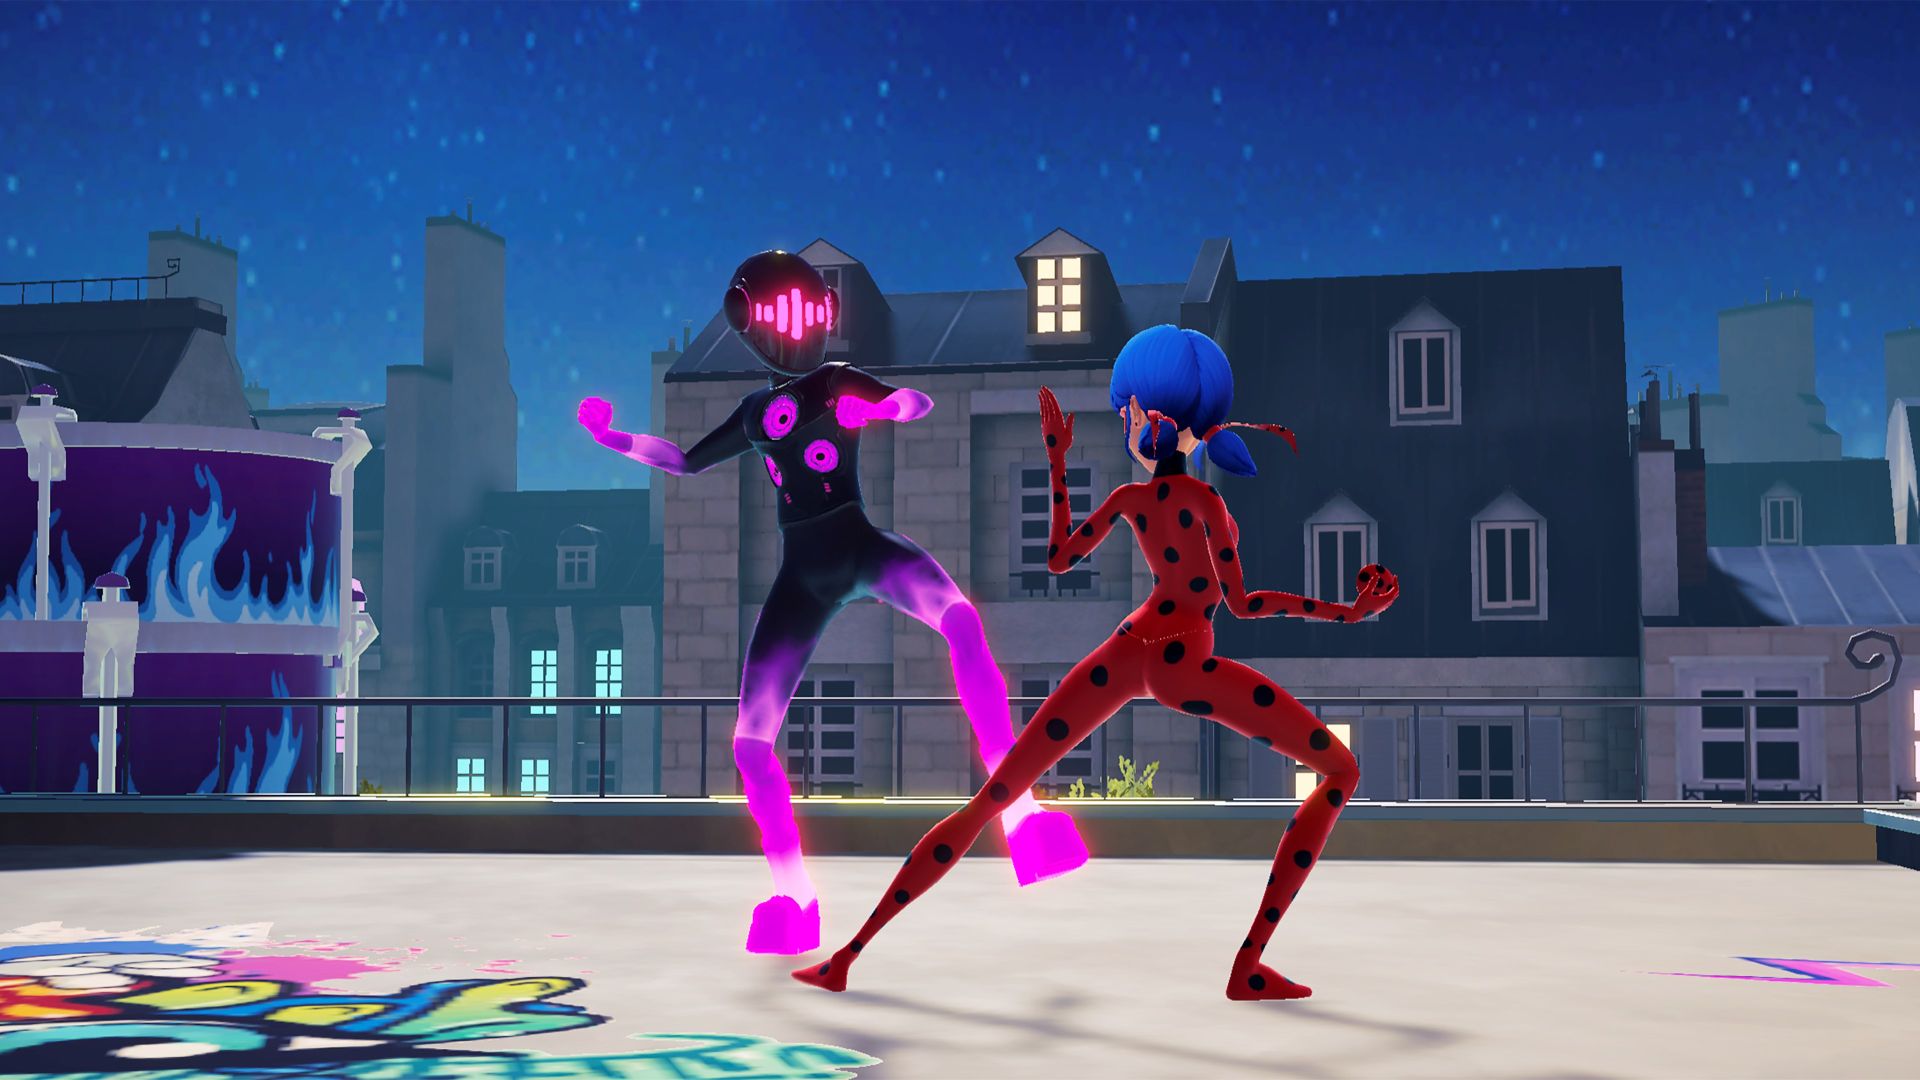 Miraculous: Rise of the Sphinx console game for Xbox Series X